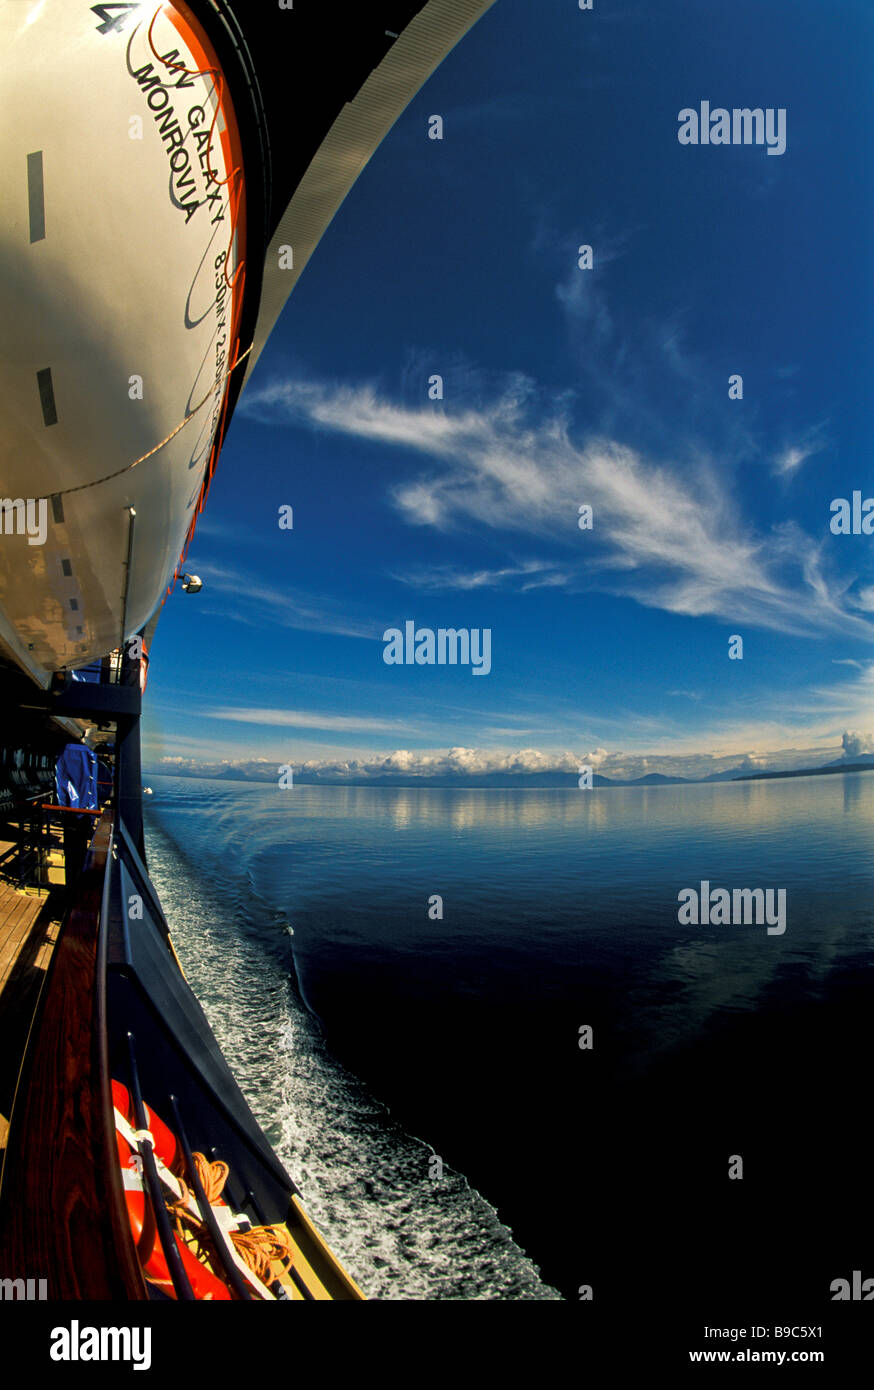 Alaska Cruise ship Inside Passage sunny weather fisheye view cruise ship water snow capped mountains life boat Stock Photo